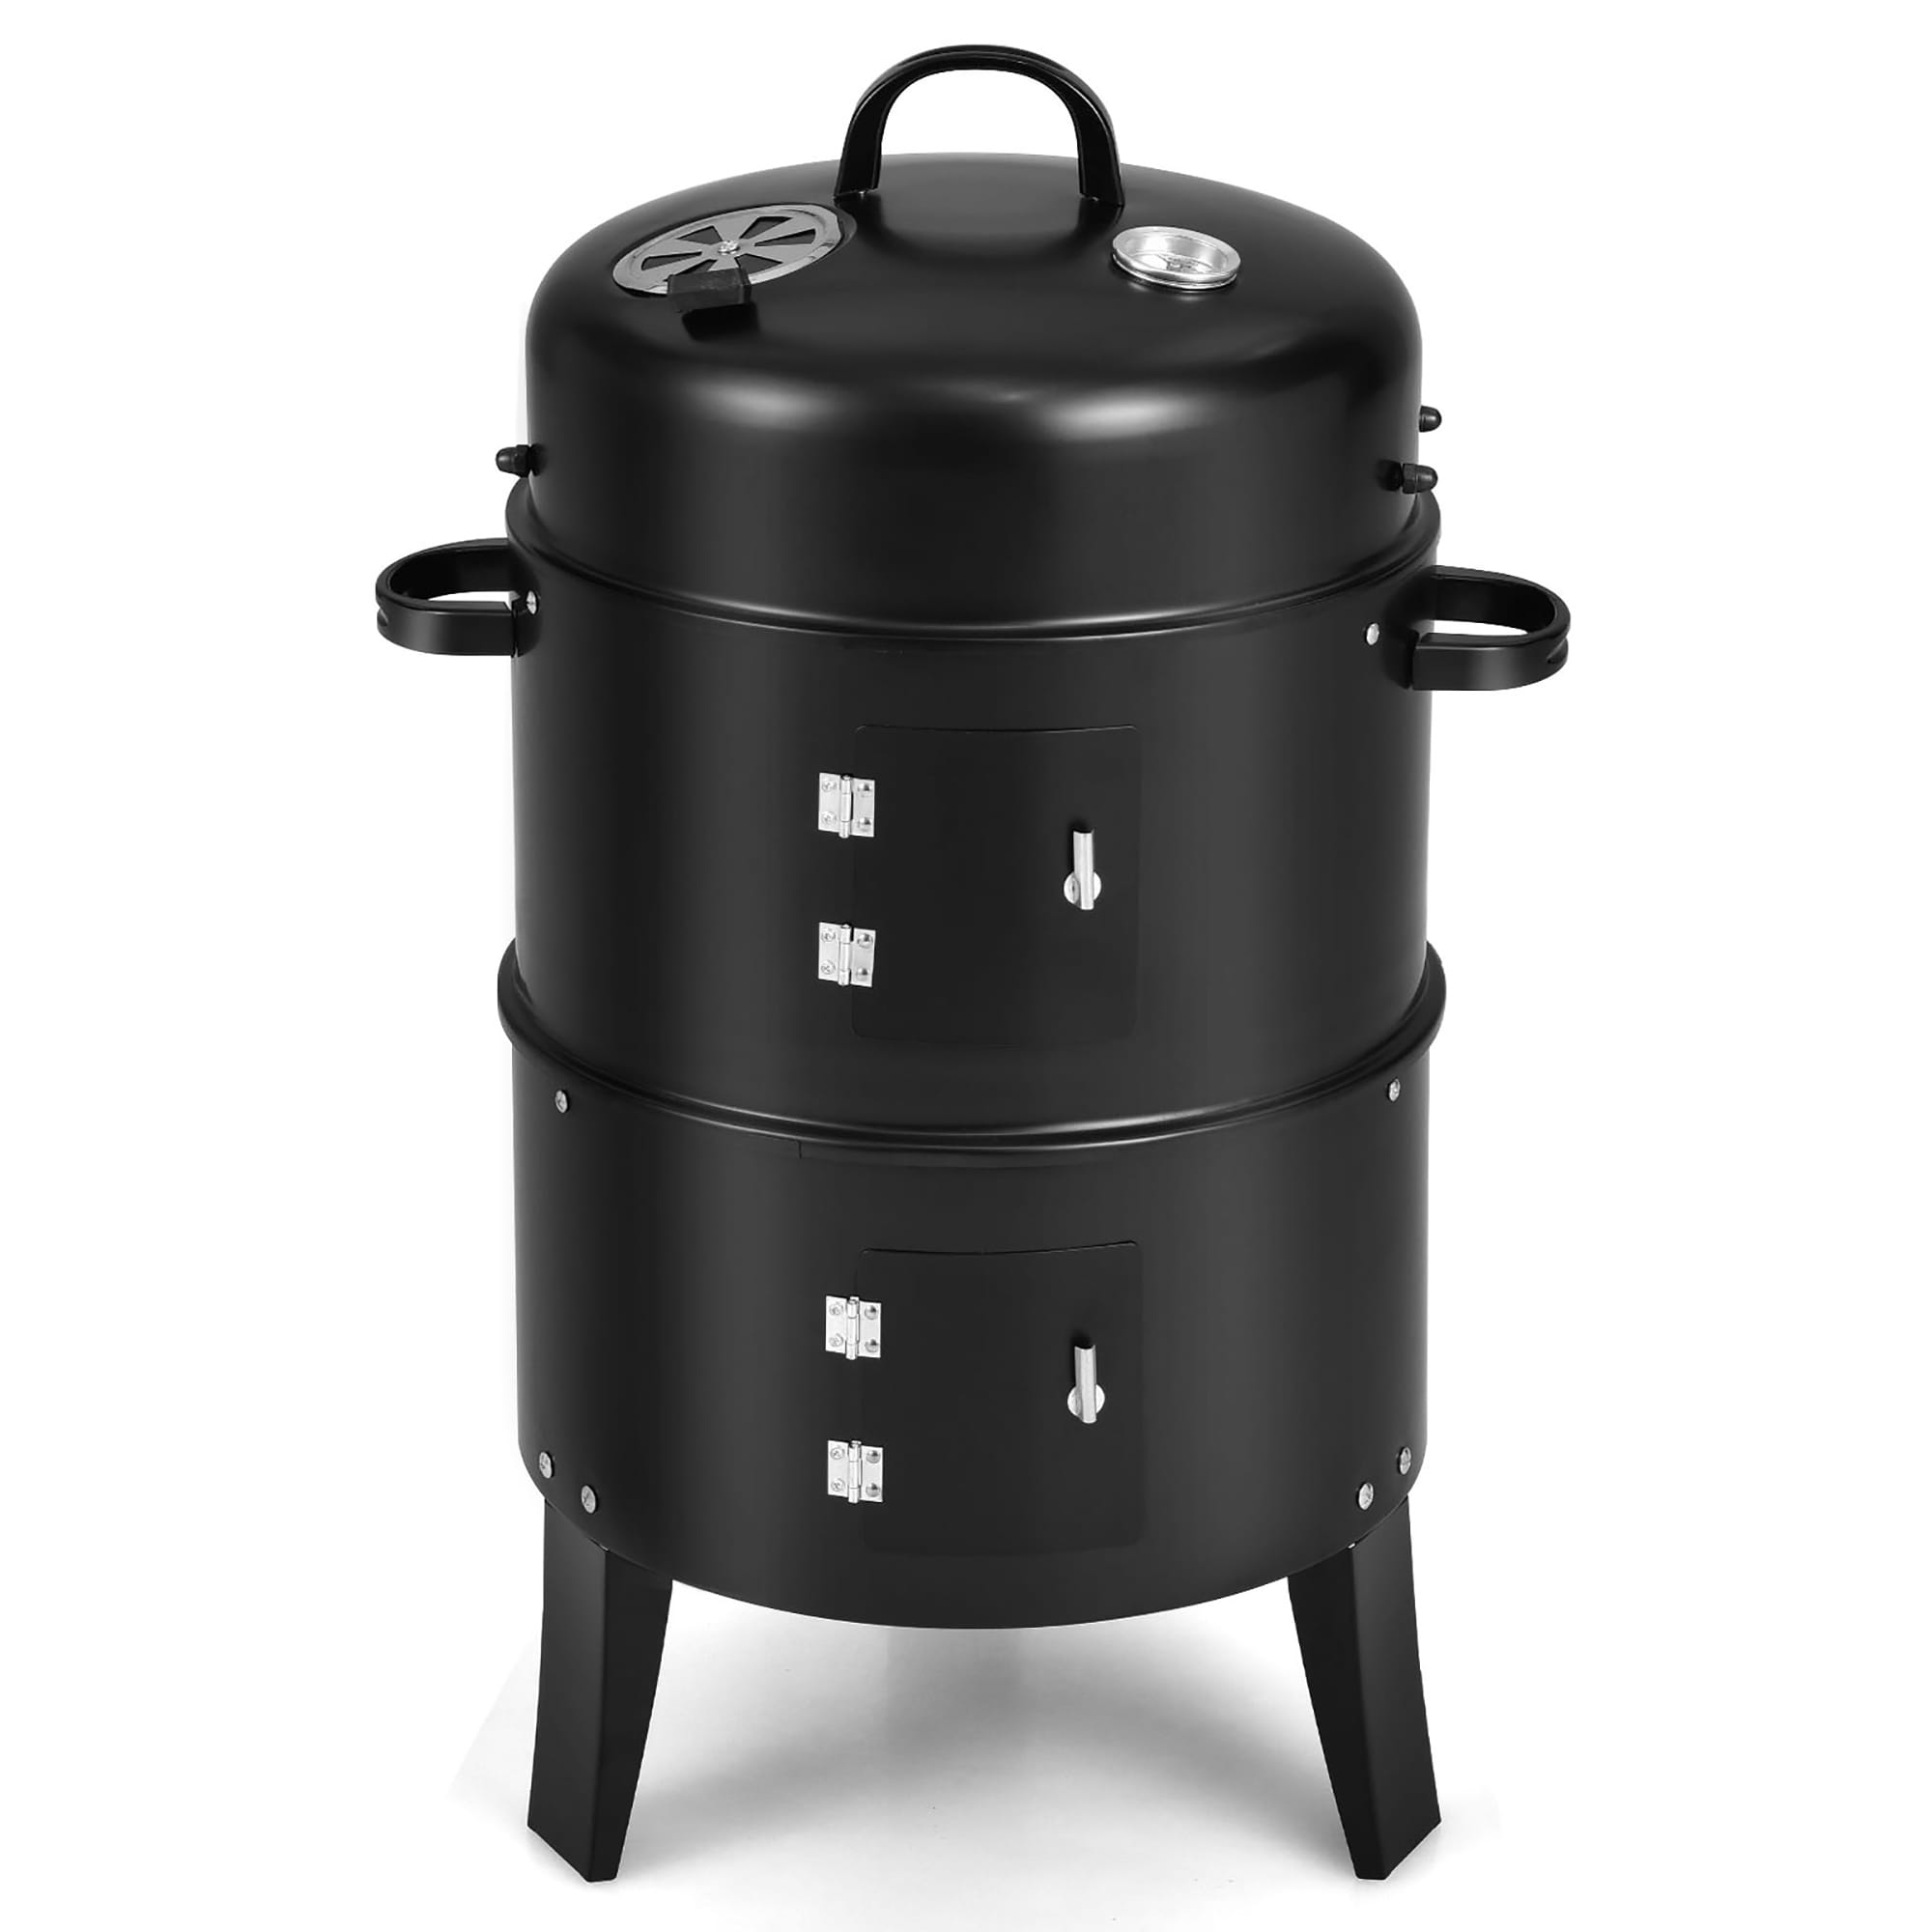 https://ak1.ostkcdn.com/images/products/is/images/direct/b56ed4bc4591ef3f5246e4a82ef45e256e8e2668/Costway3-in-1-Vertical-Charcoal-Smoker-Portable-BBQ-Smoker-Grill-with.jpg